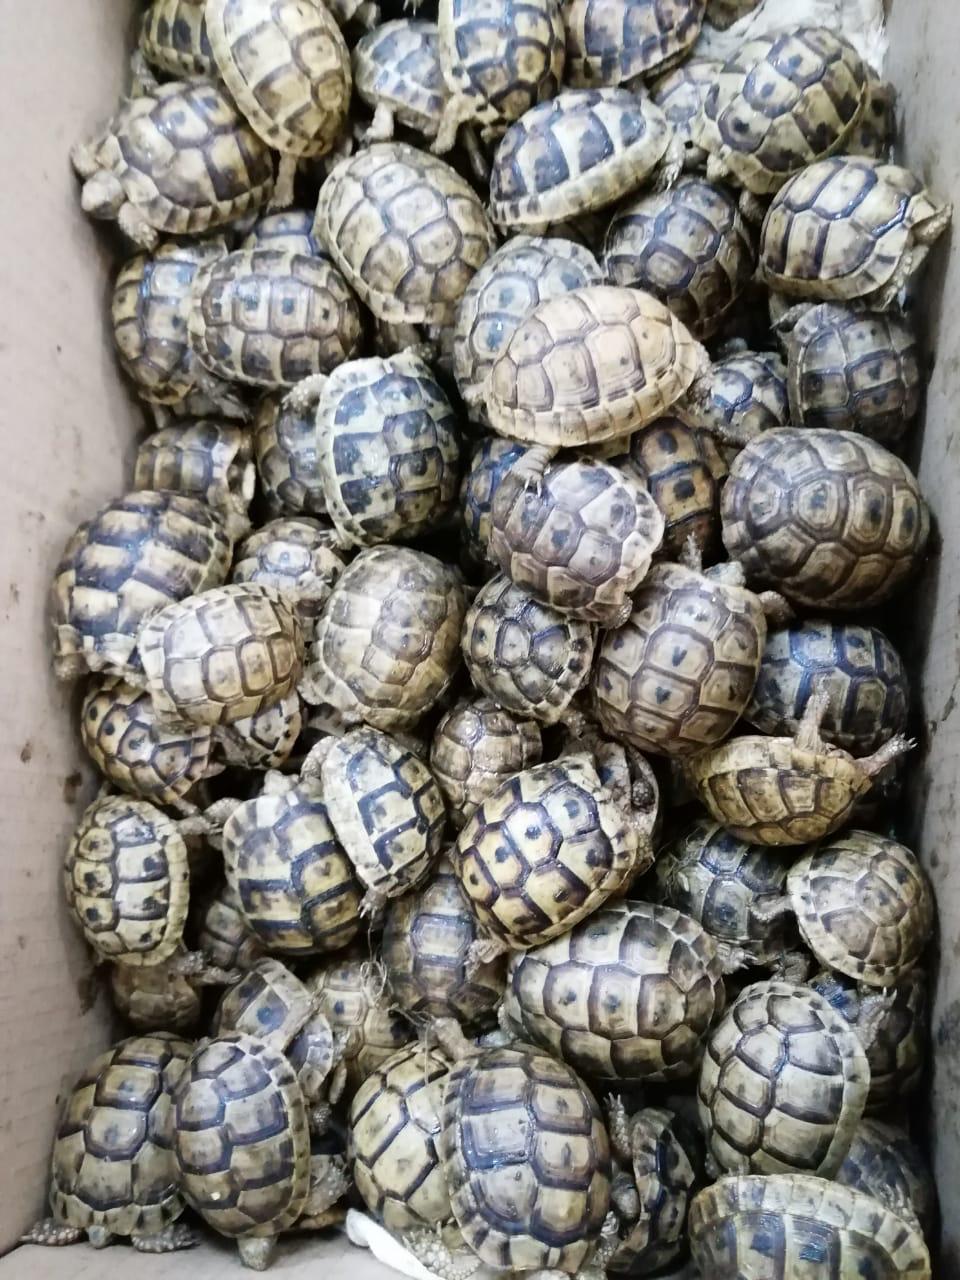 Confiscated Greek Tortoises